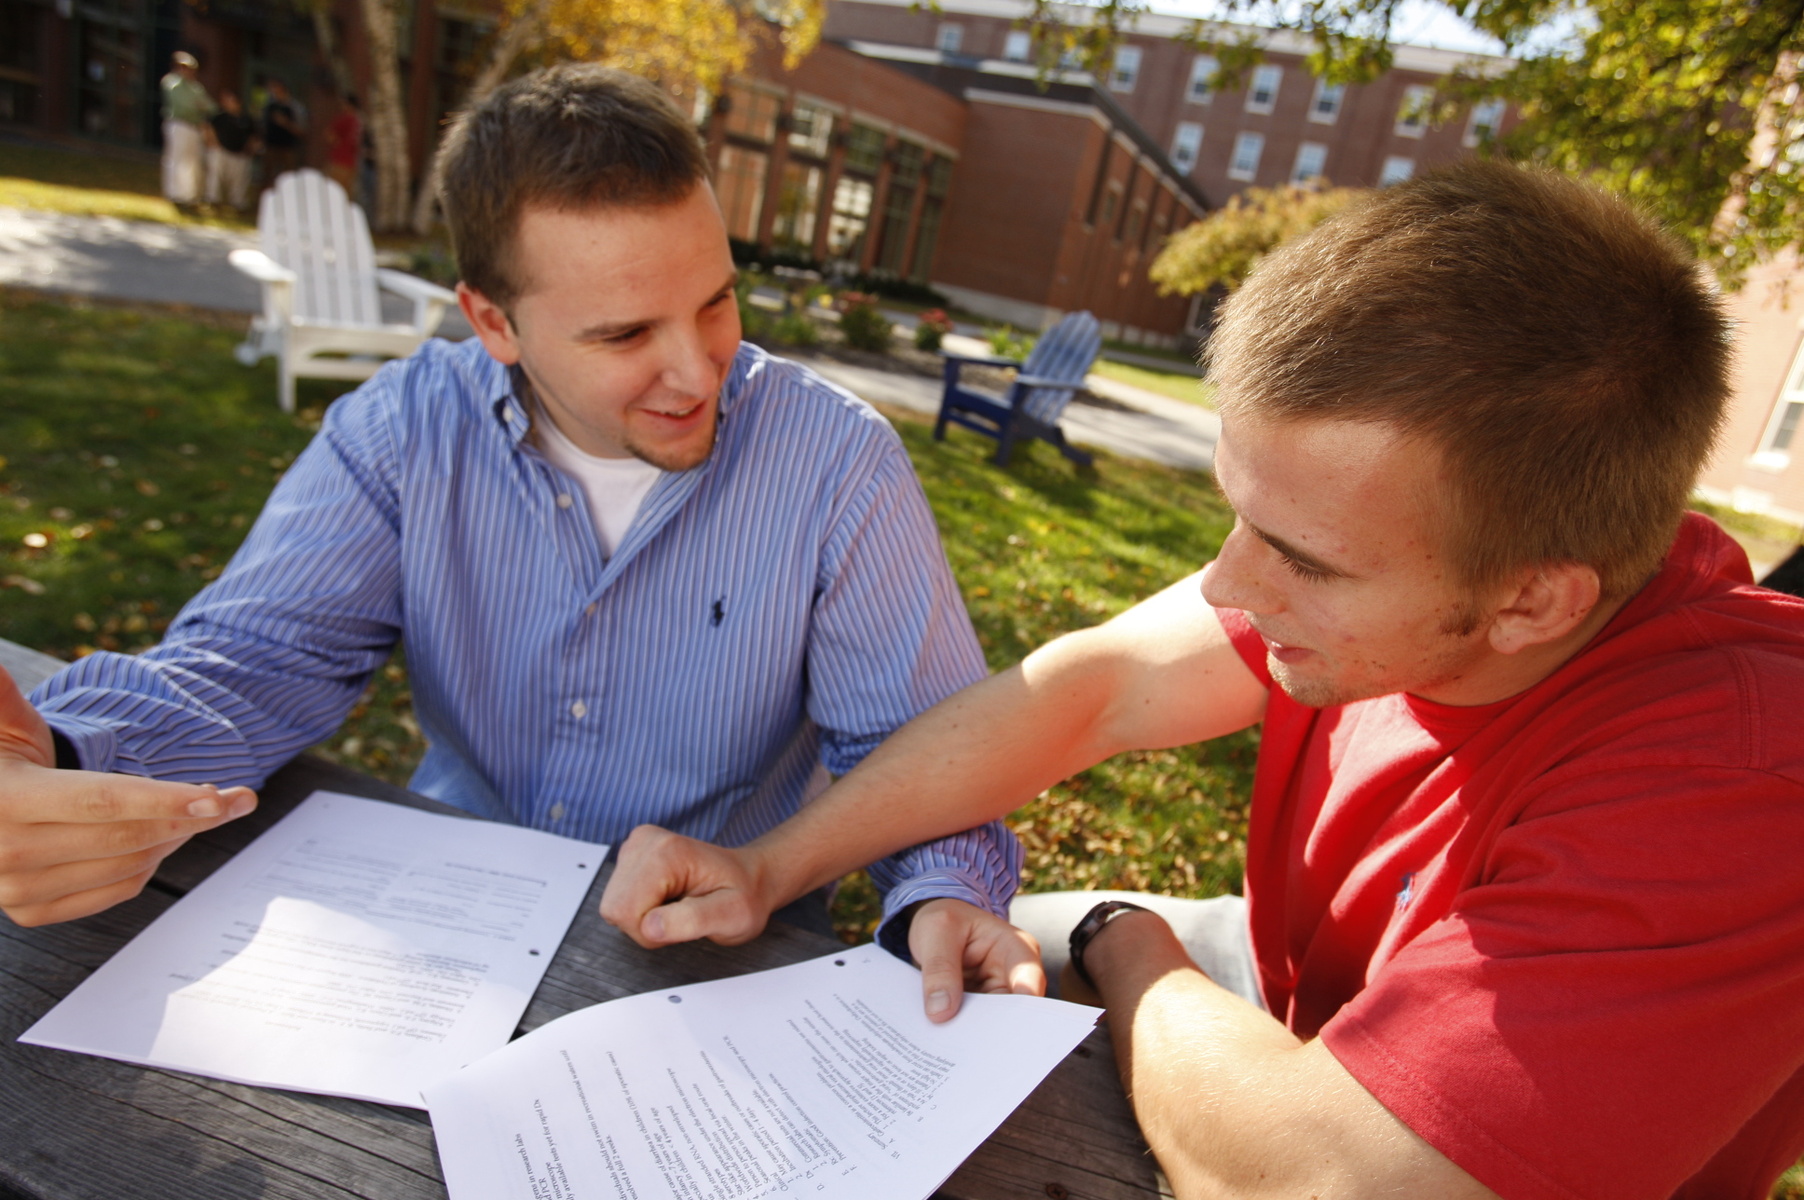 Two male students sit outside on a nice day looking at some classwork